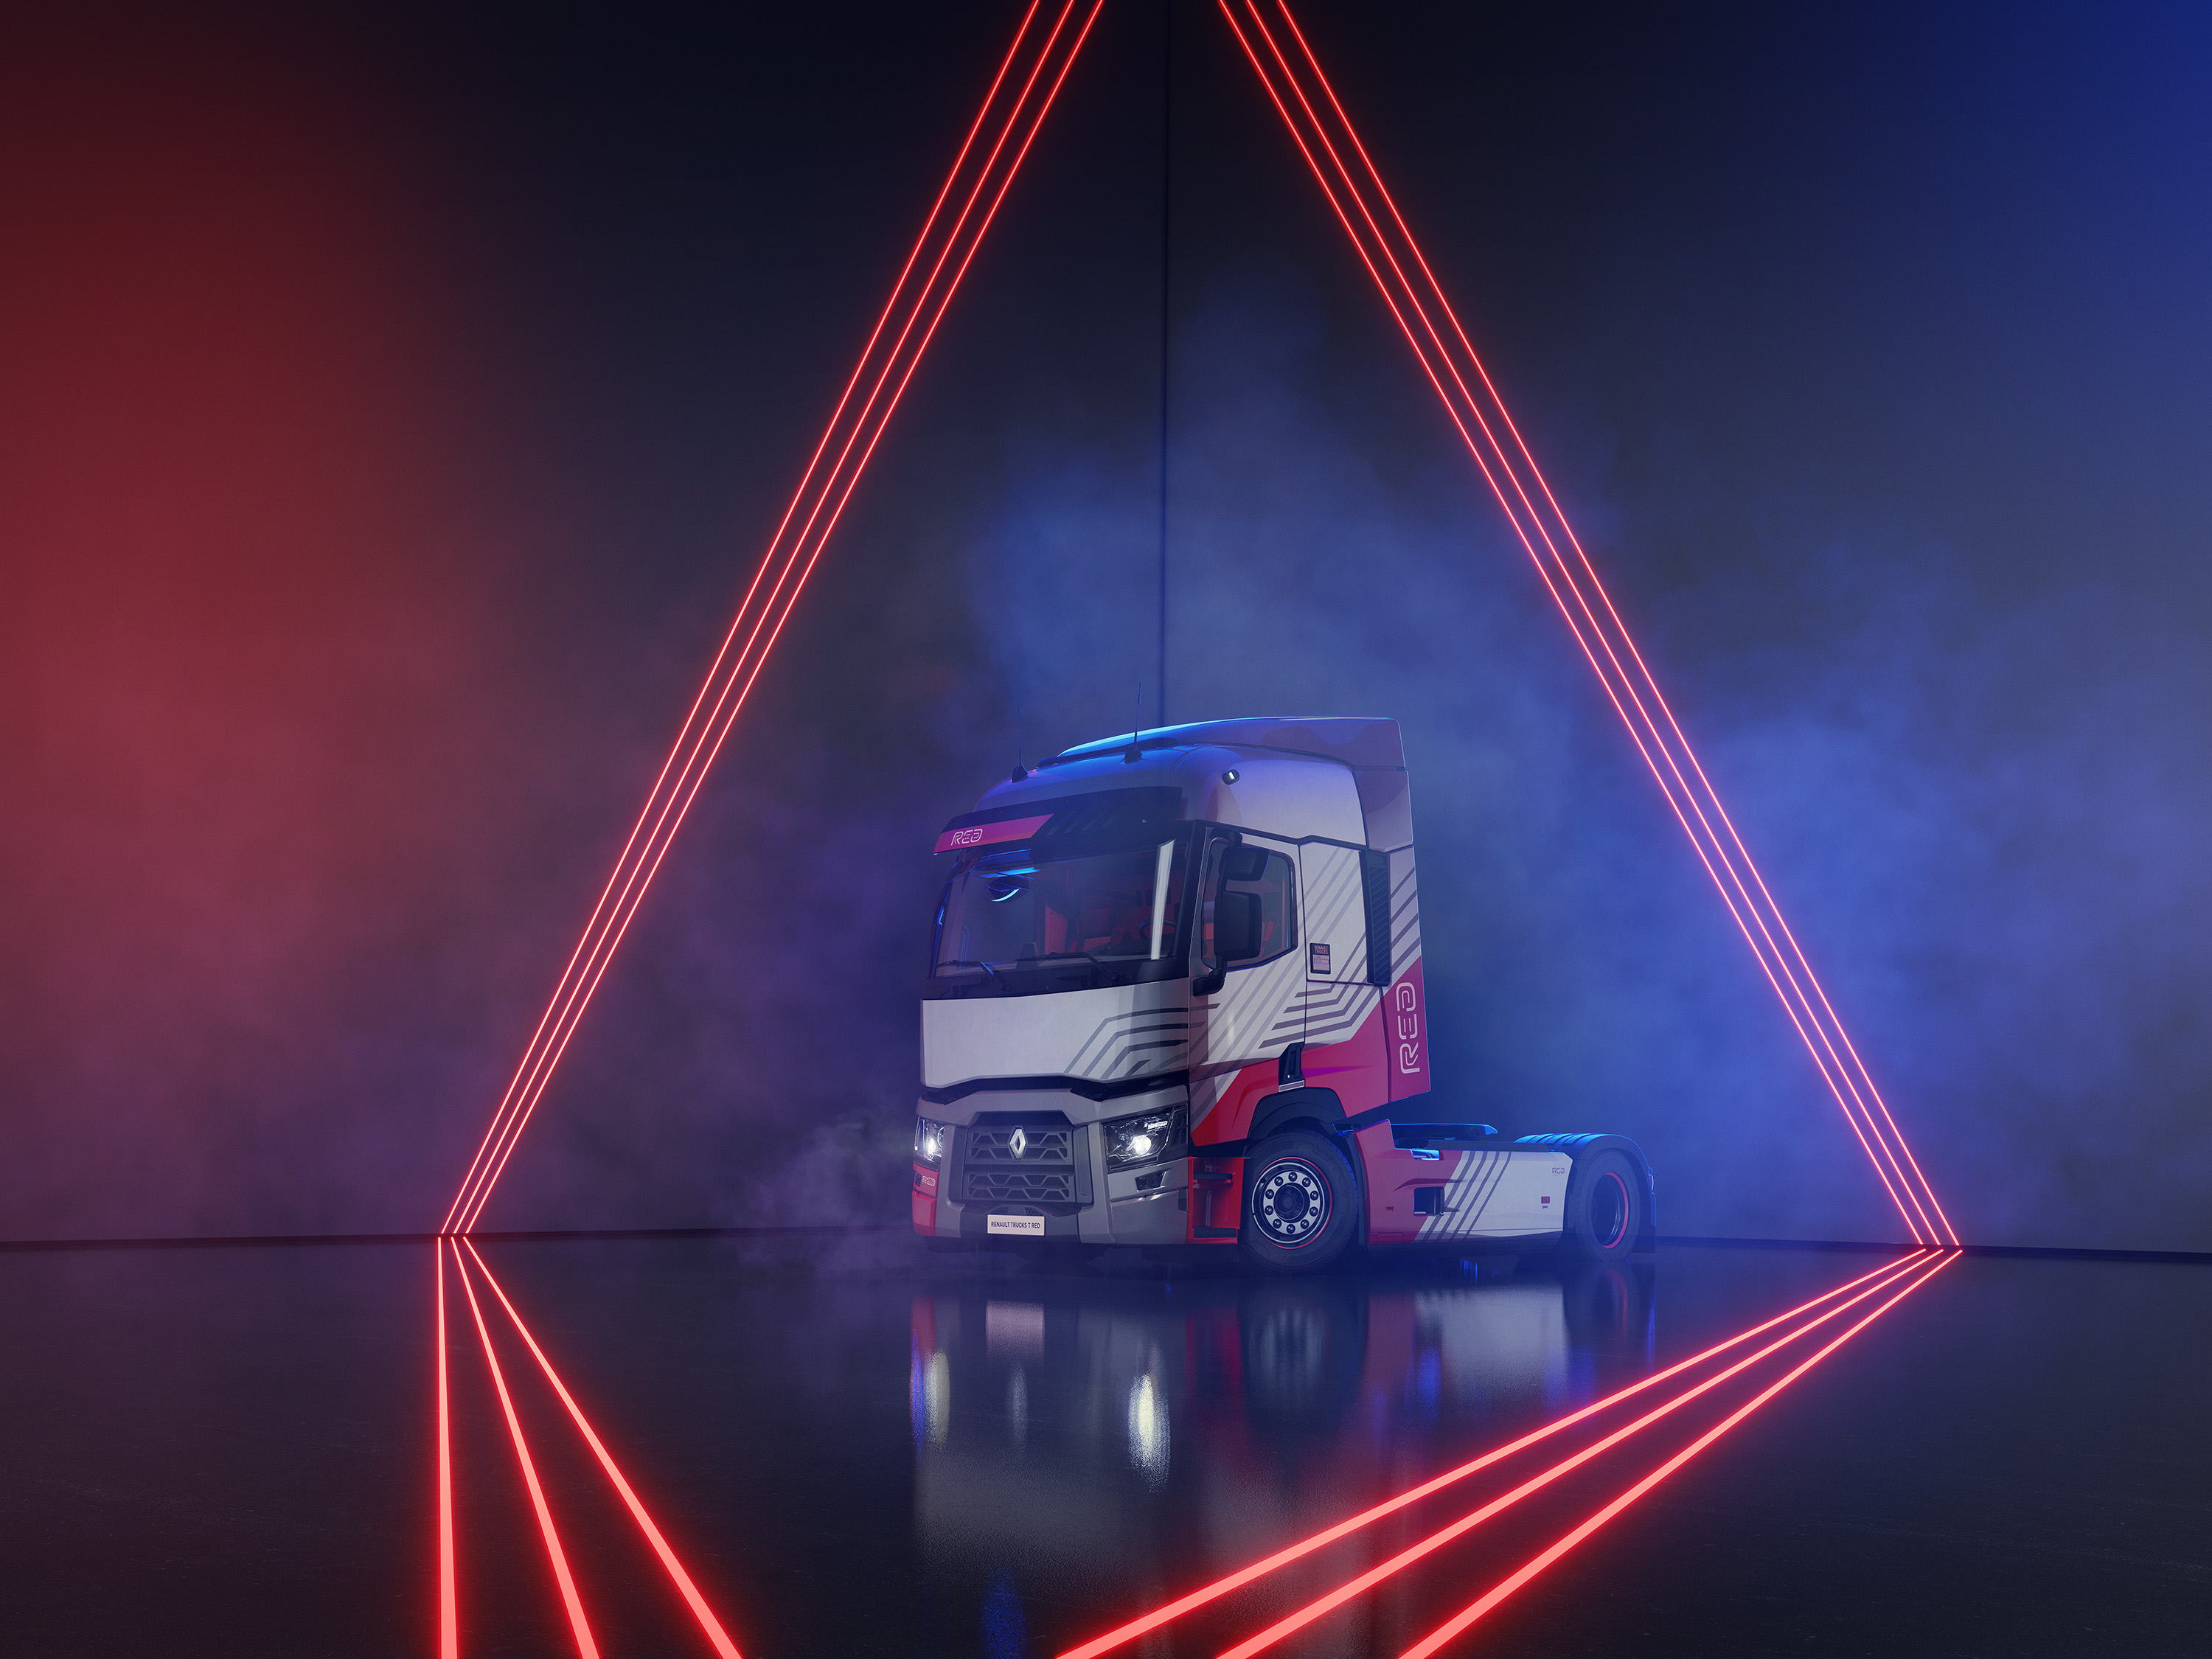 New generation Renault Trucks Master Red EDITION: efficient and versatile